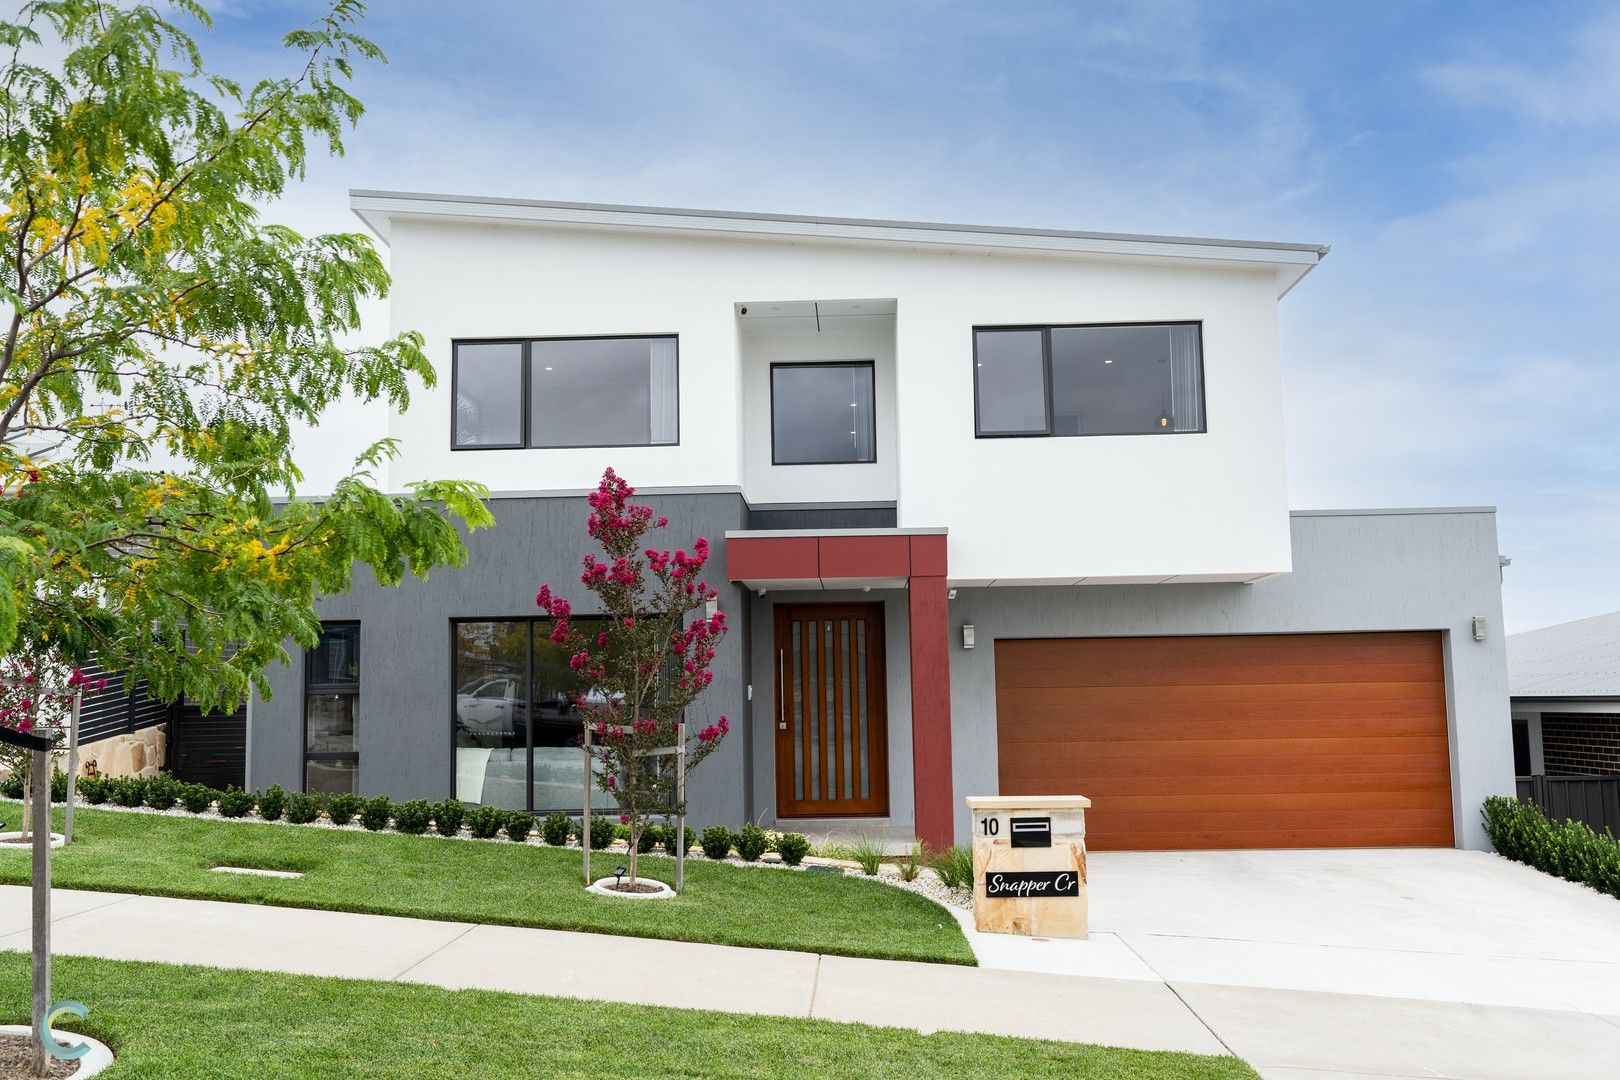 4 bedrooms House in 10 Snapper Crescent THROSBY ACT, 2914